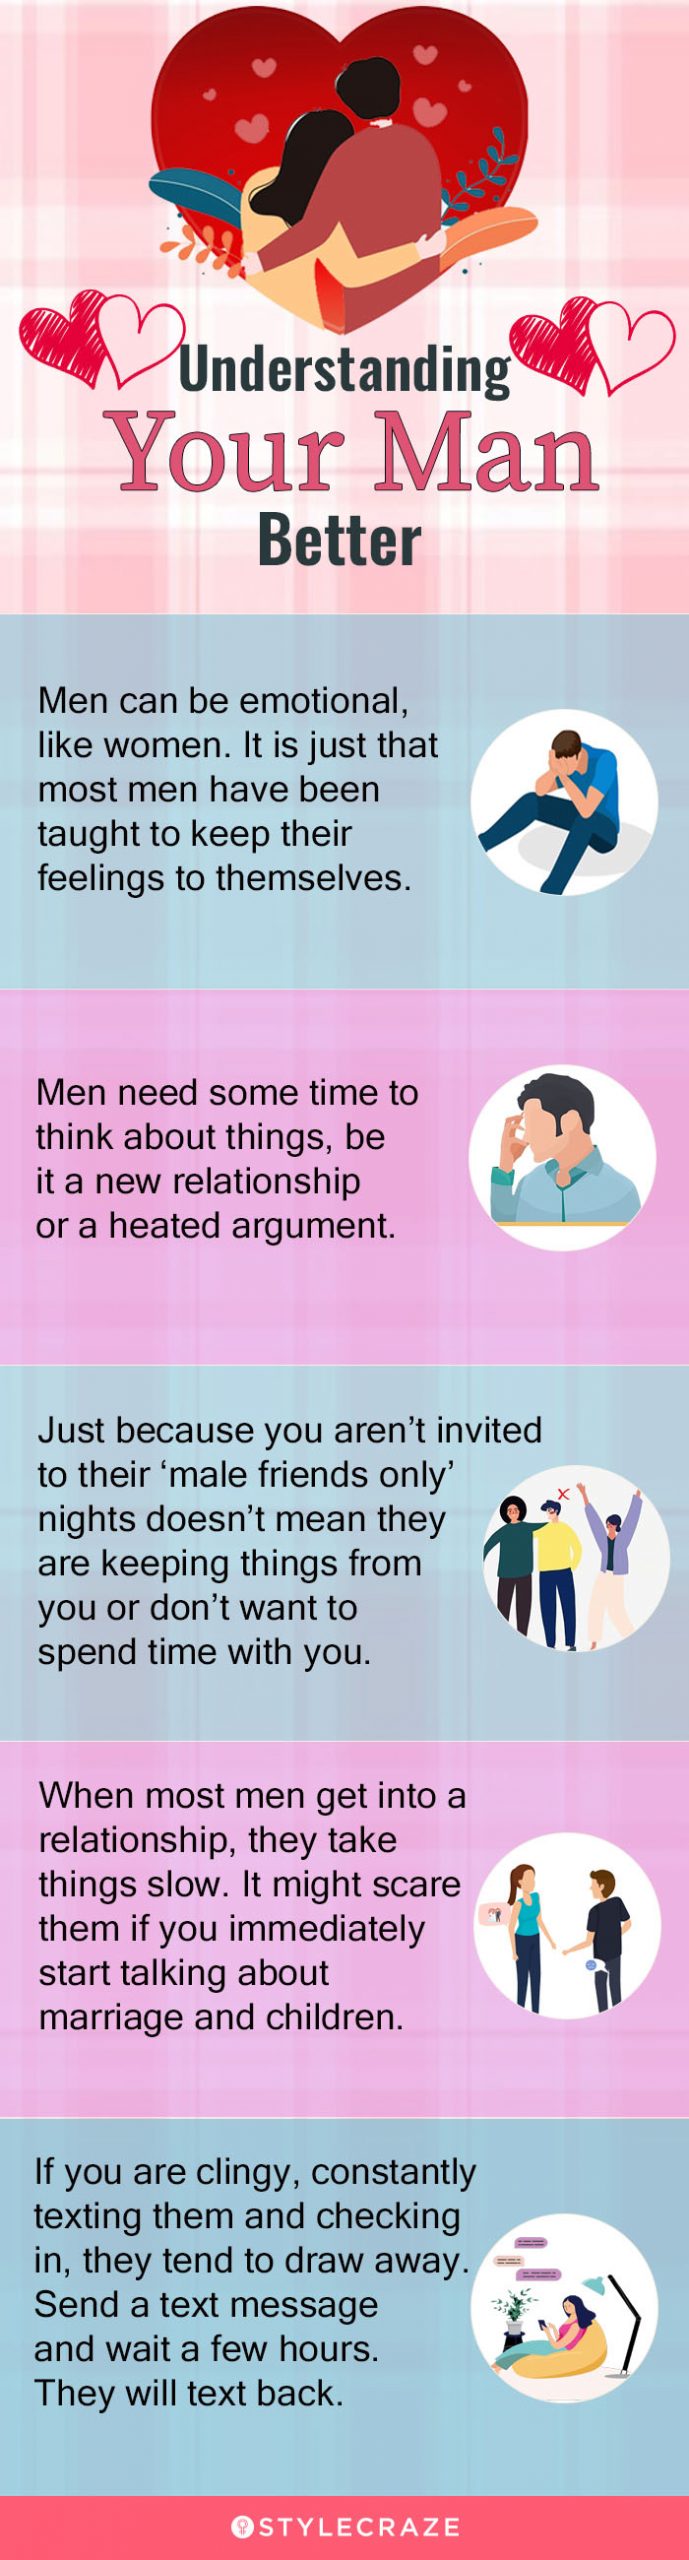 understand your man better [infographic]